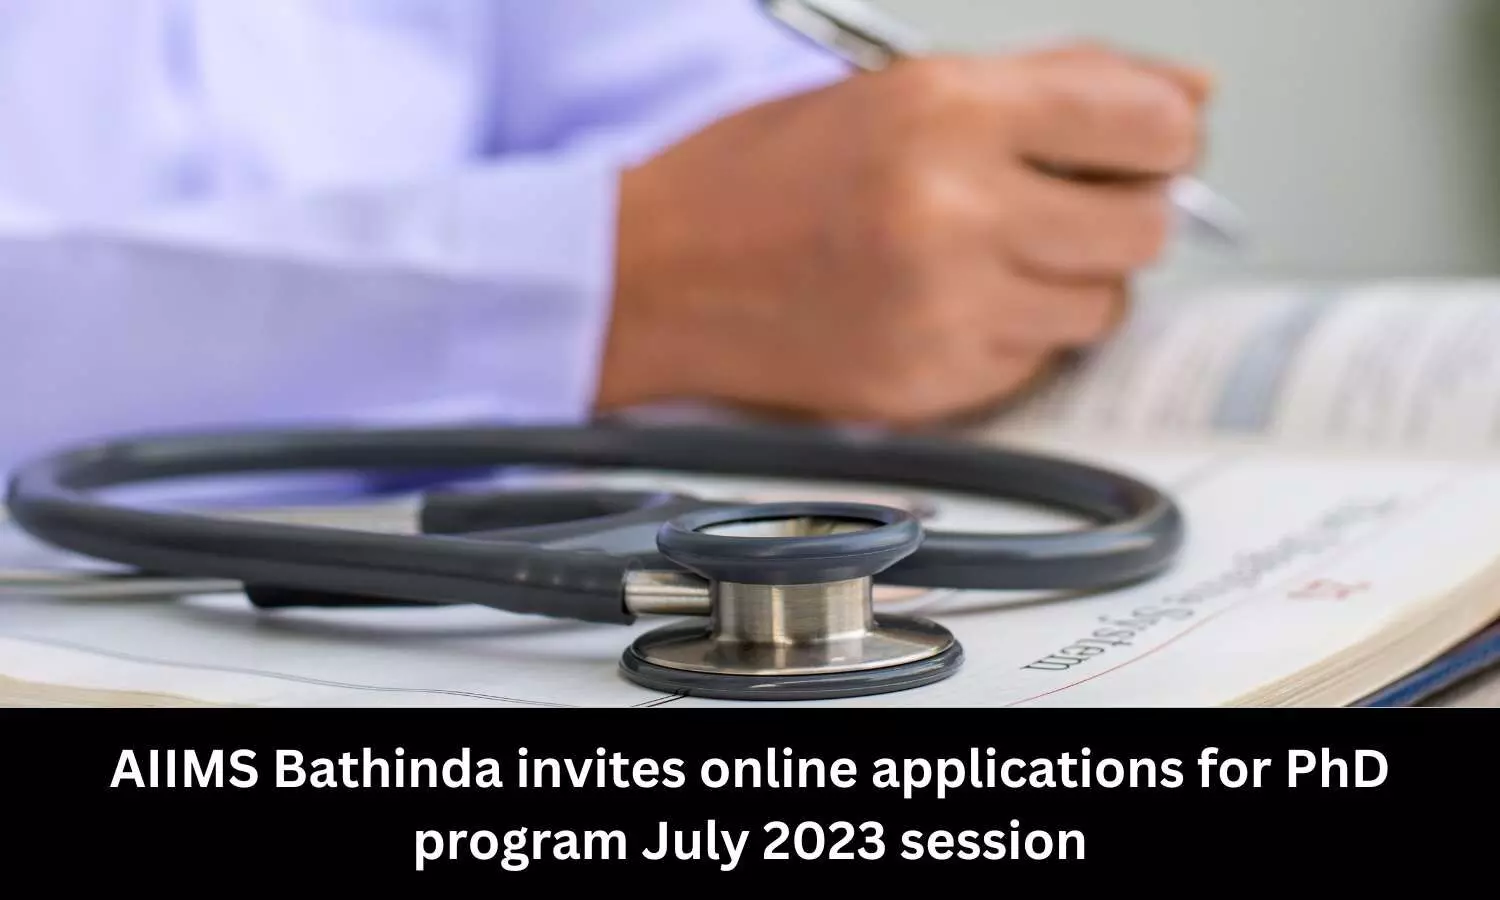 Online applications invited by AIIMS Bathinda for PhD Program for July 2023 session